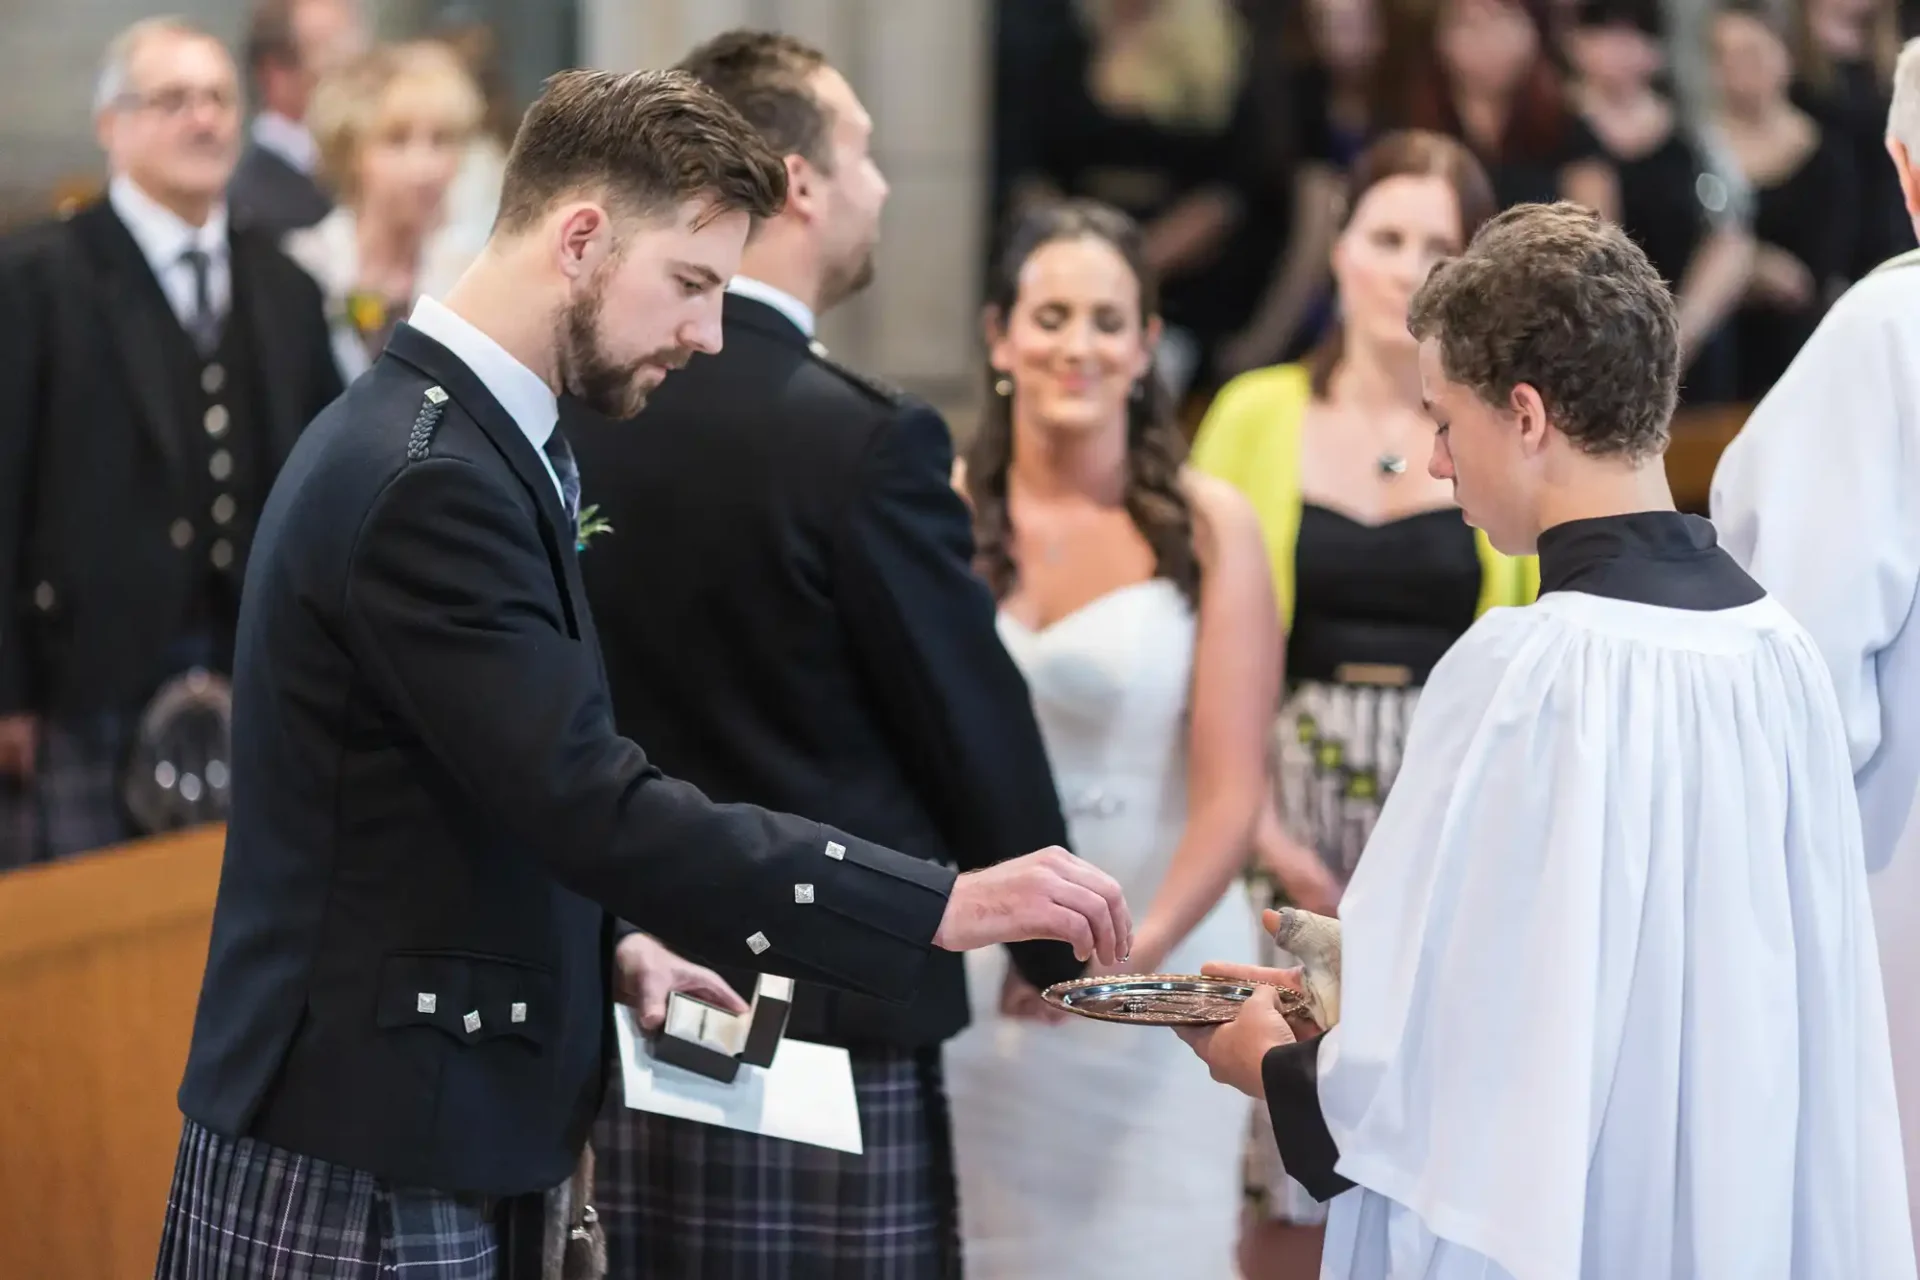 A groom in a kilt exchanging rings with a bride during a church wedding ceremony, witnessed by guests and a clergy member.